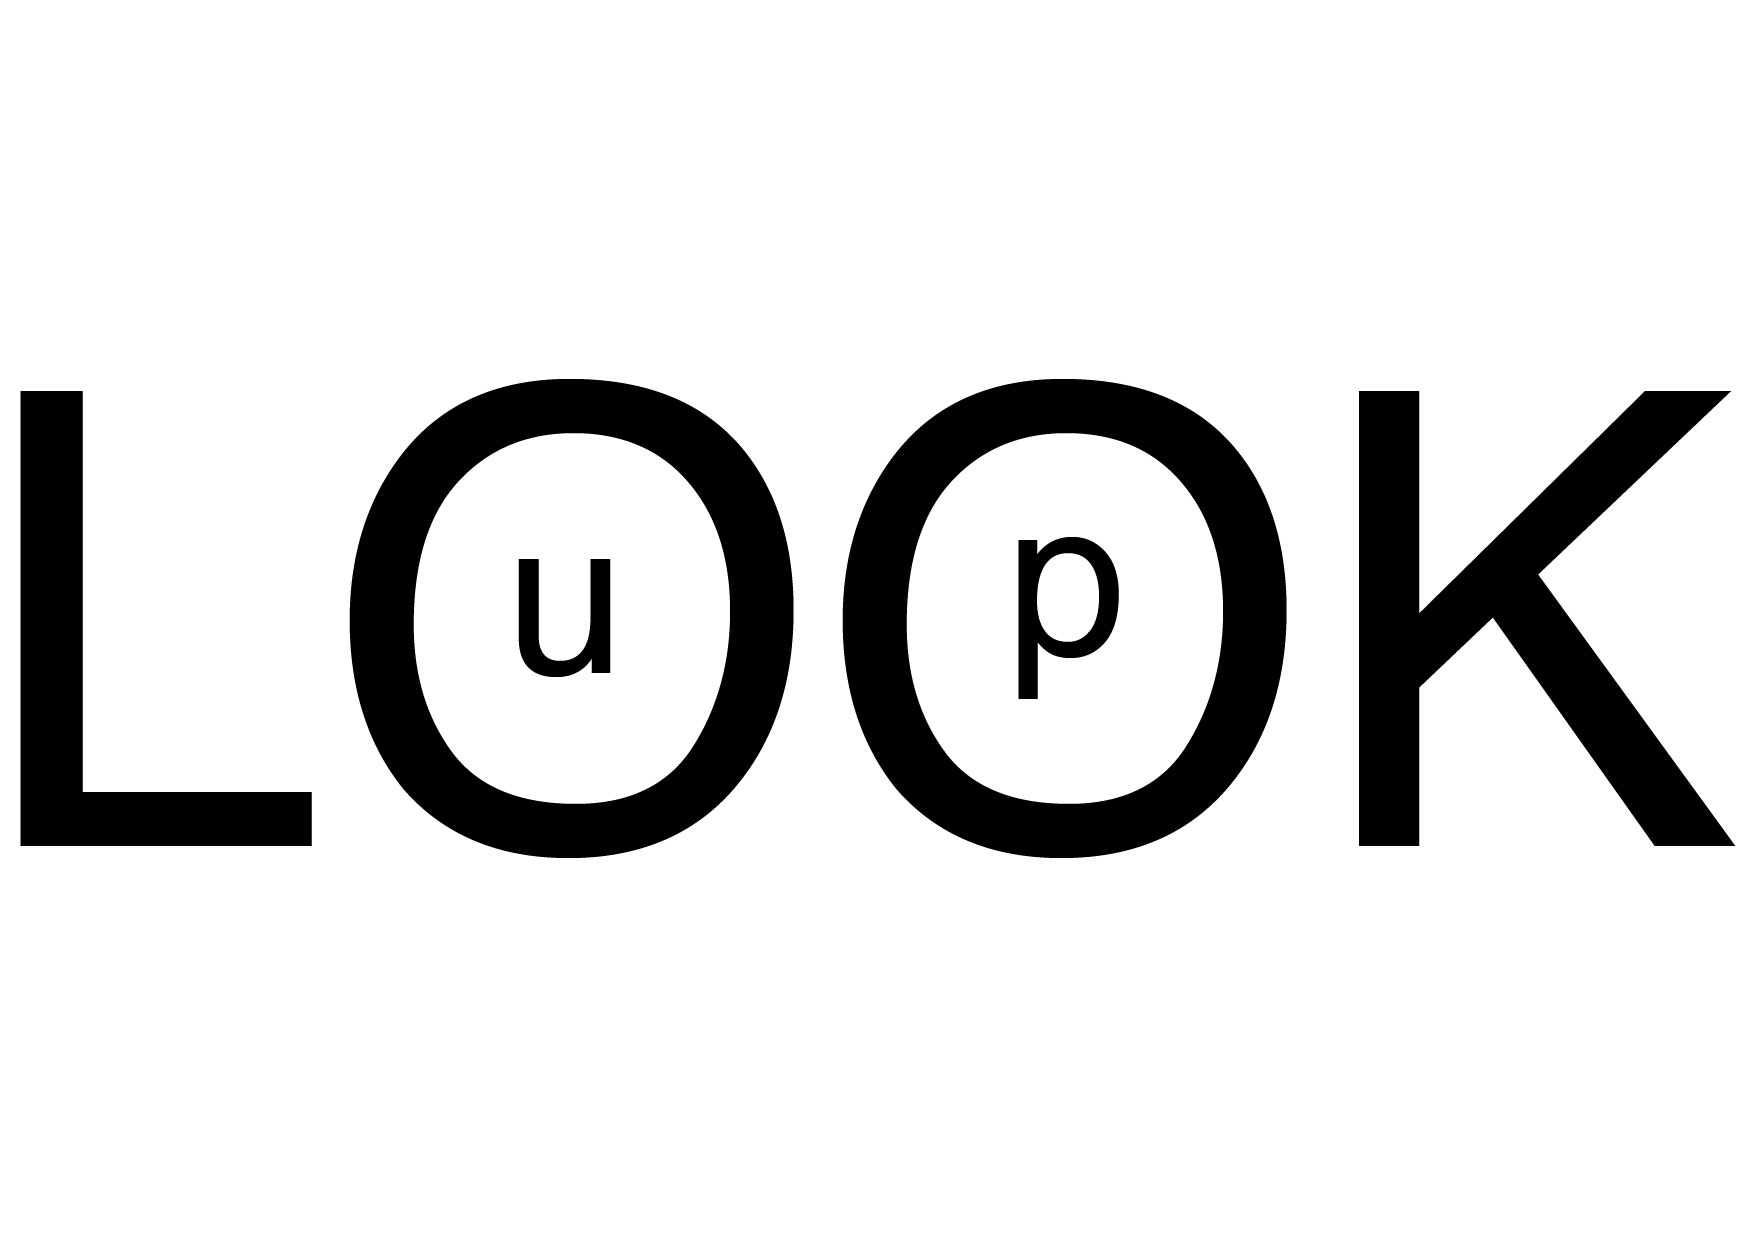 Be looked. Look up. Look up look up to. Looh up. Look up in the Dictionary.